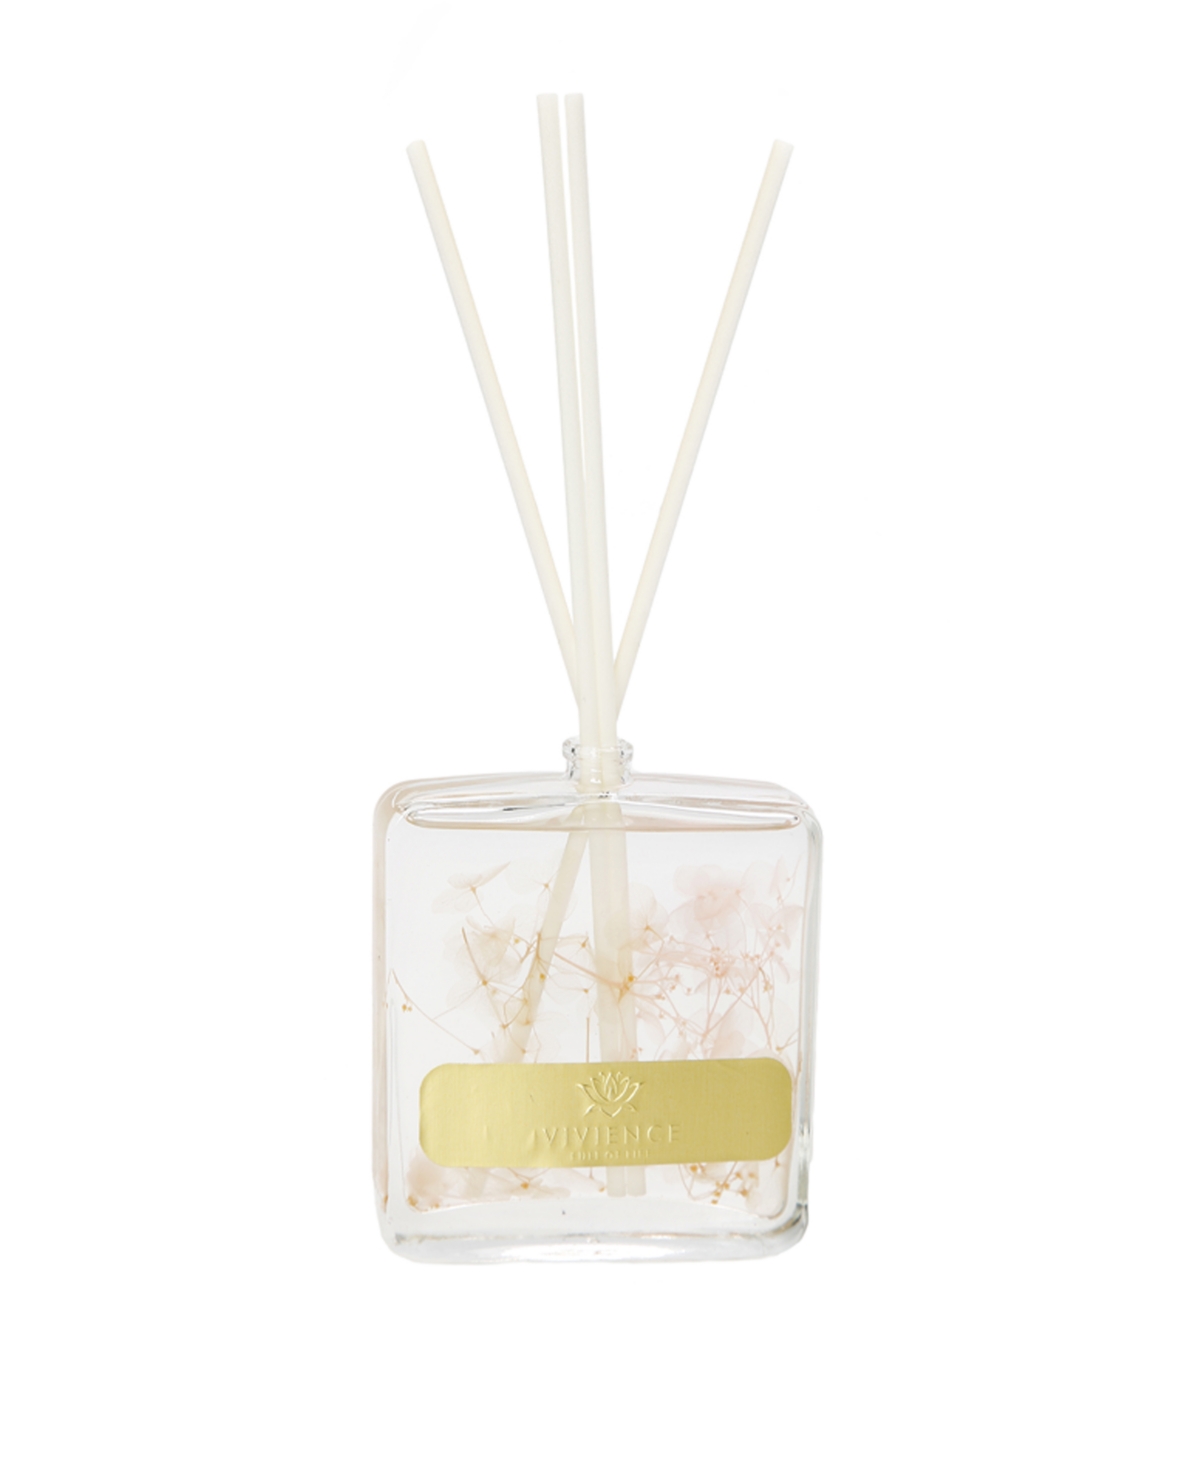 Smoked Glass Reed Diffuser "Zen Tea" Scent - Smoked